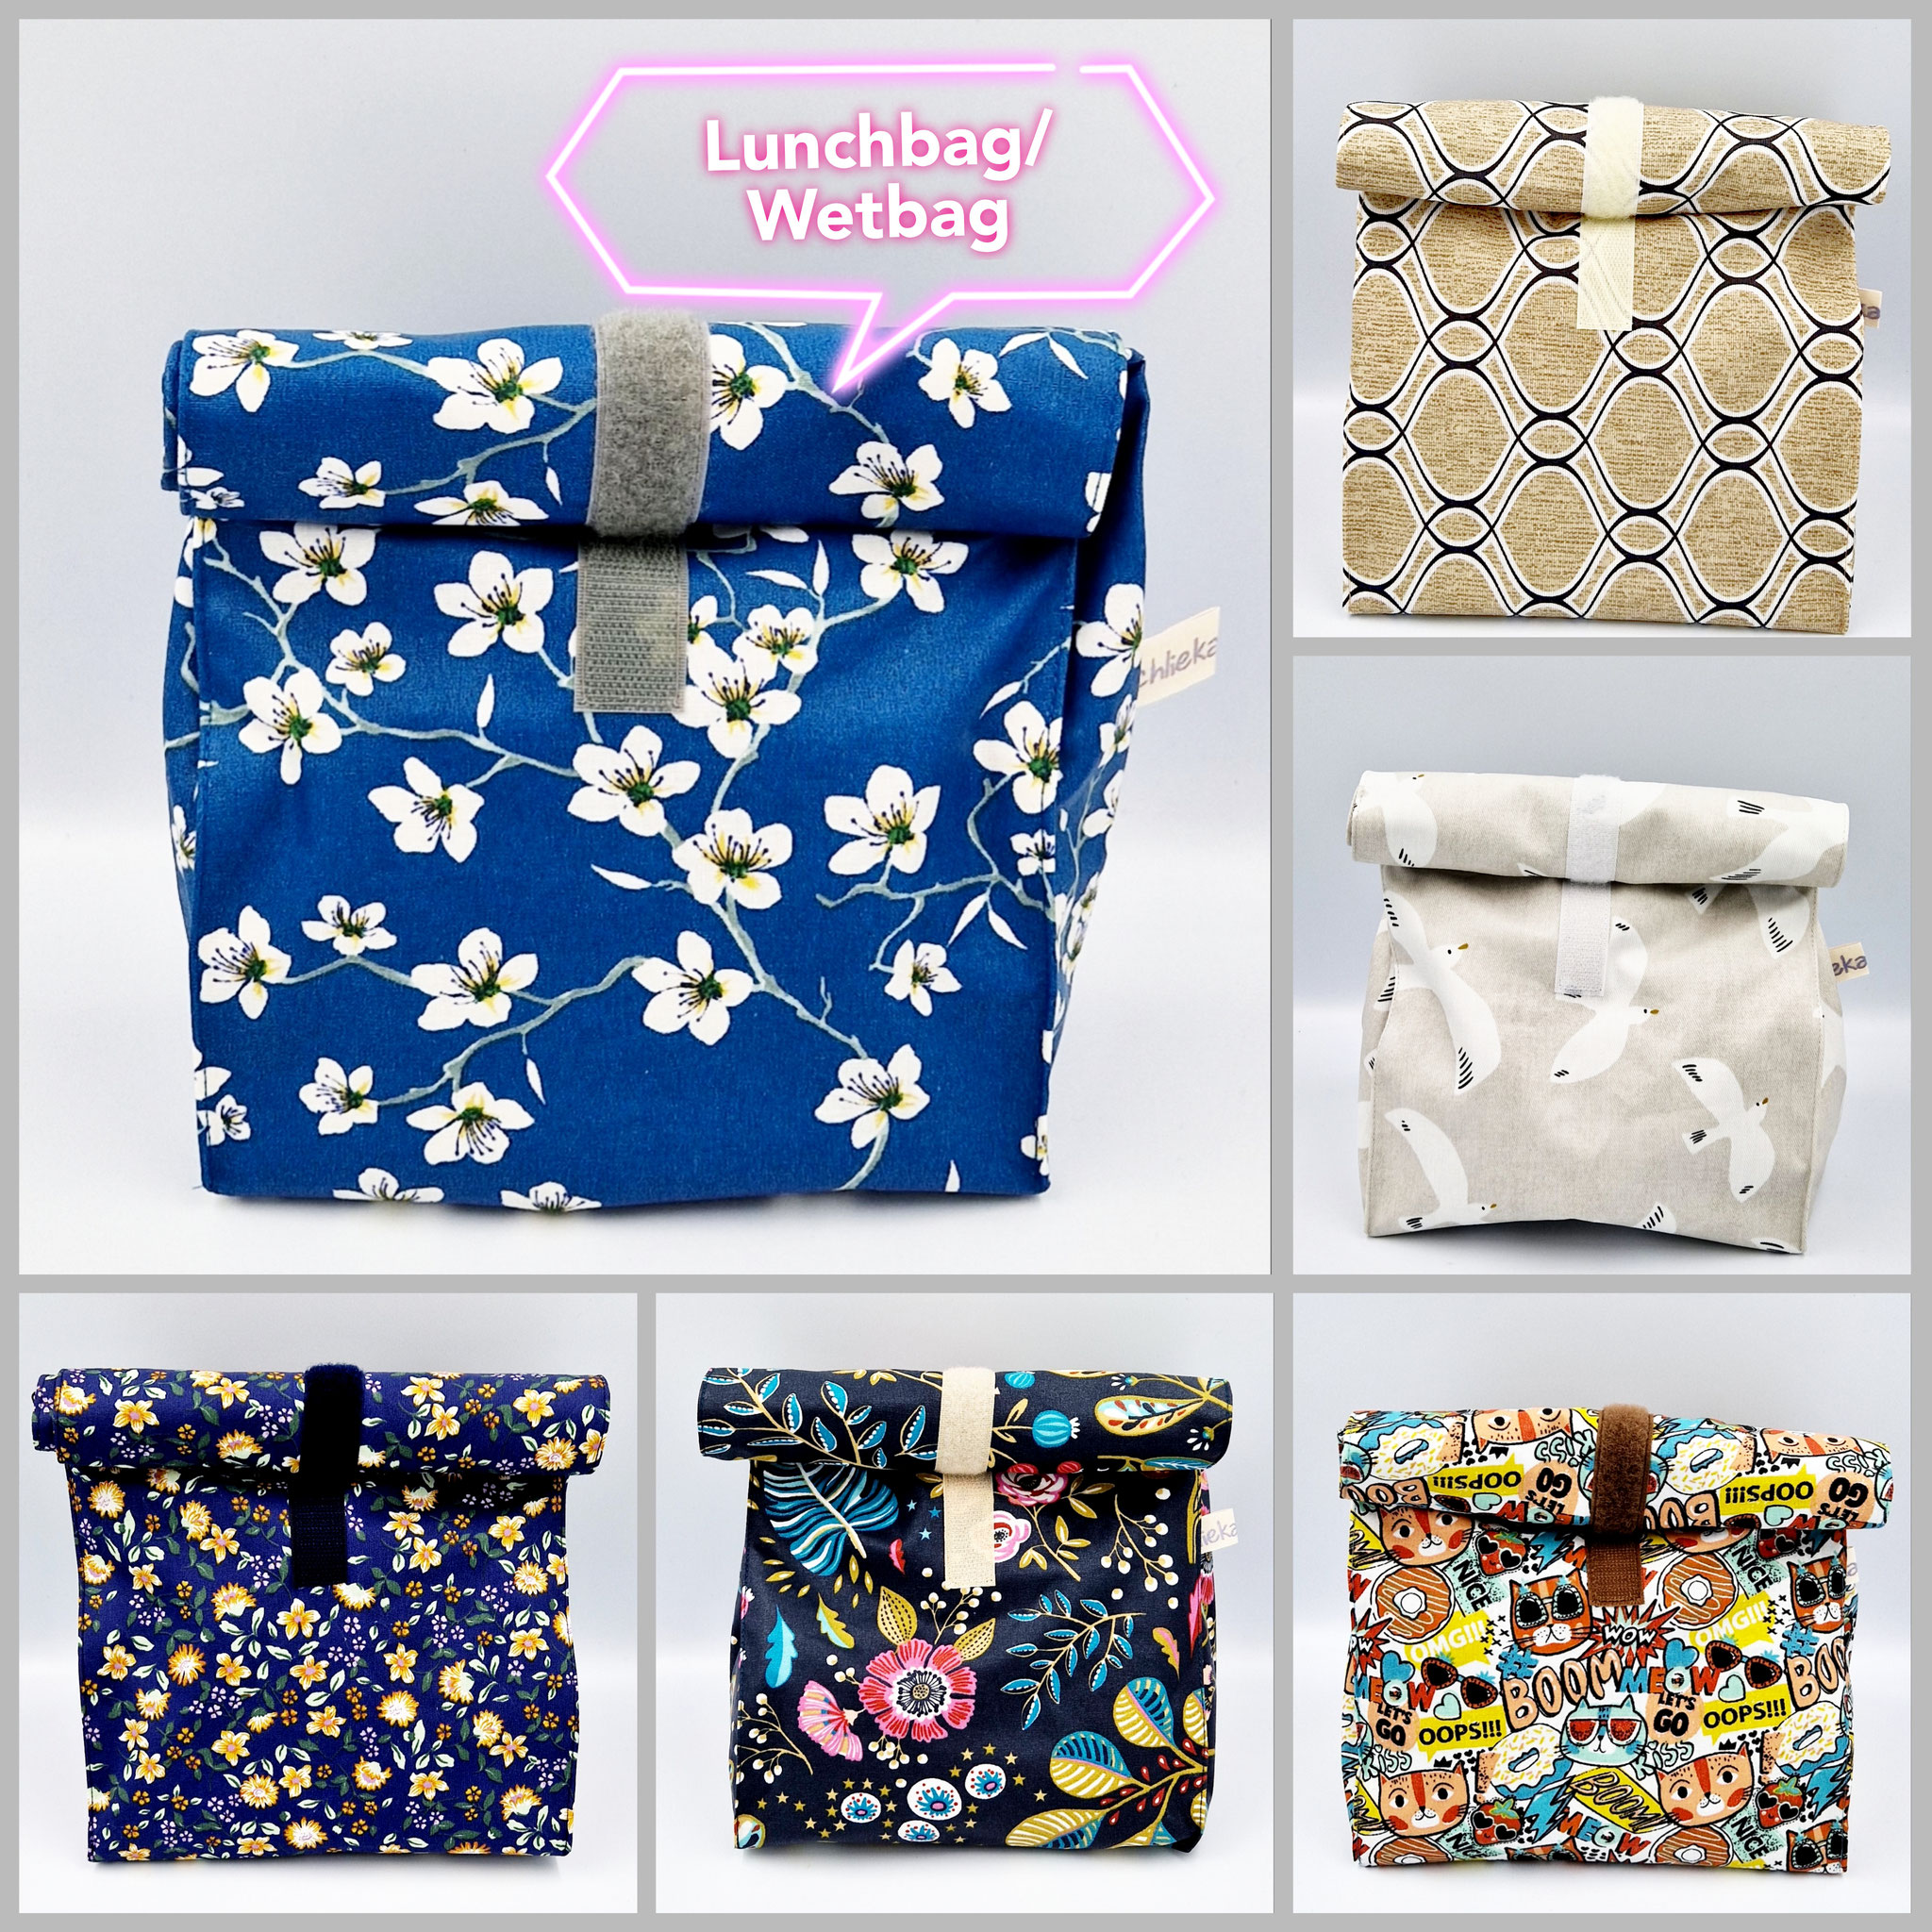 Lunchbags / Wetbags